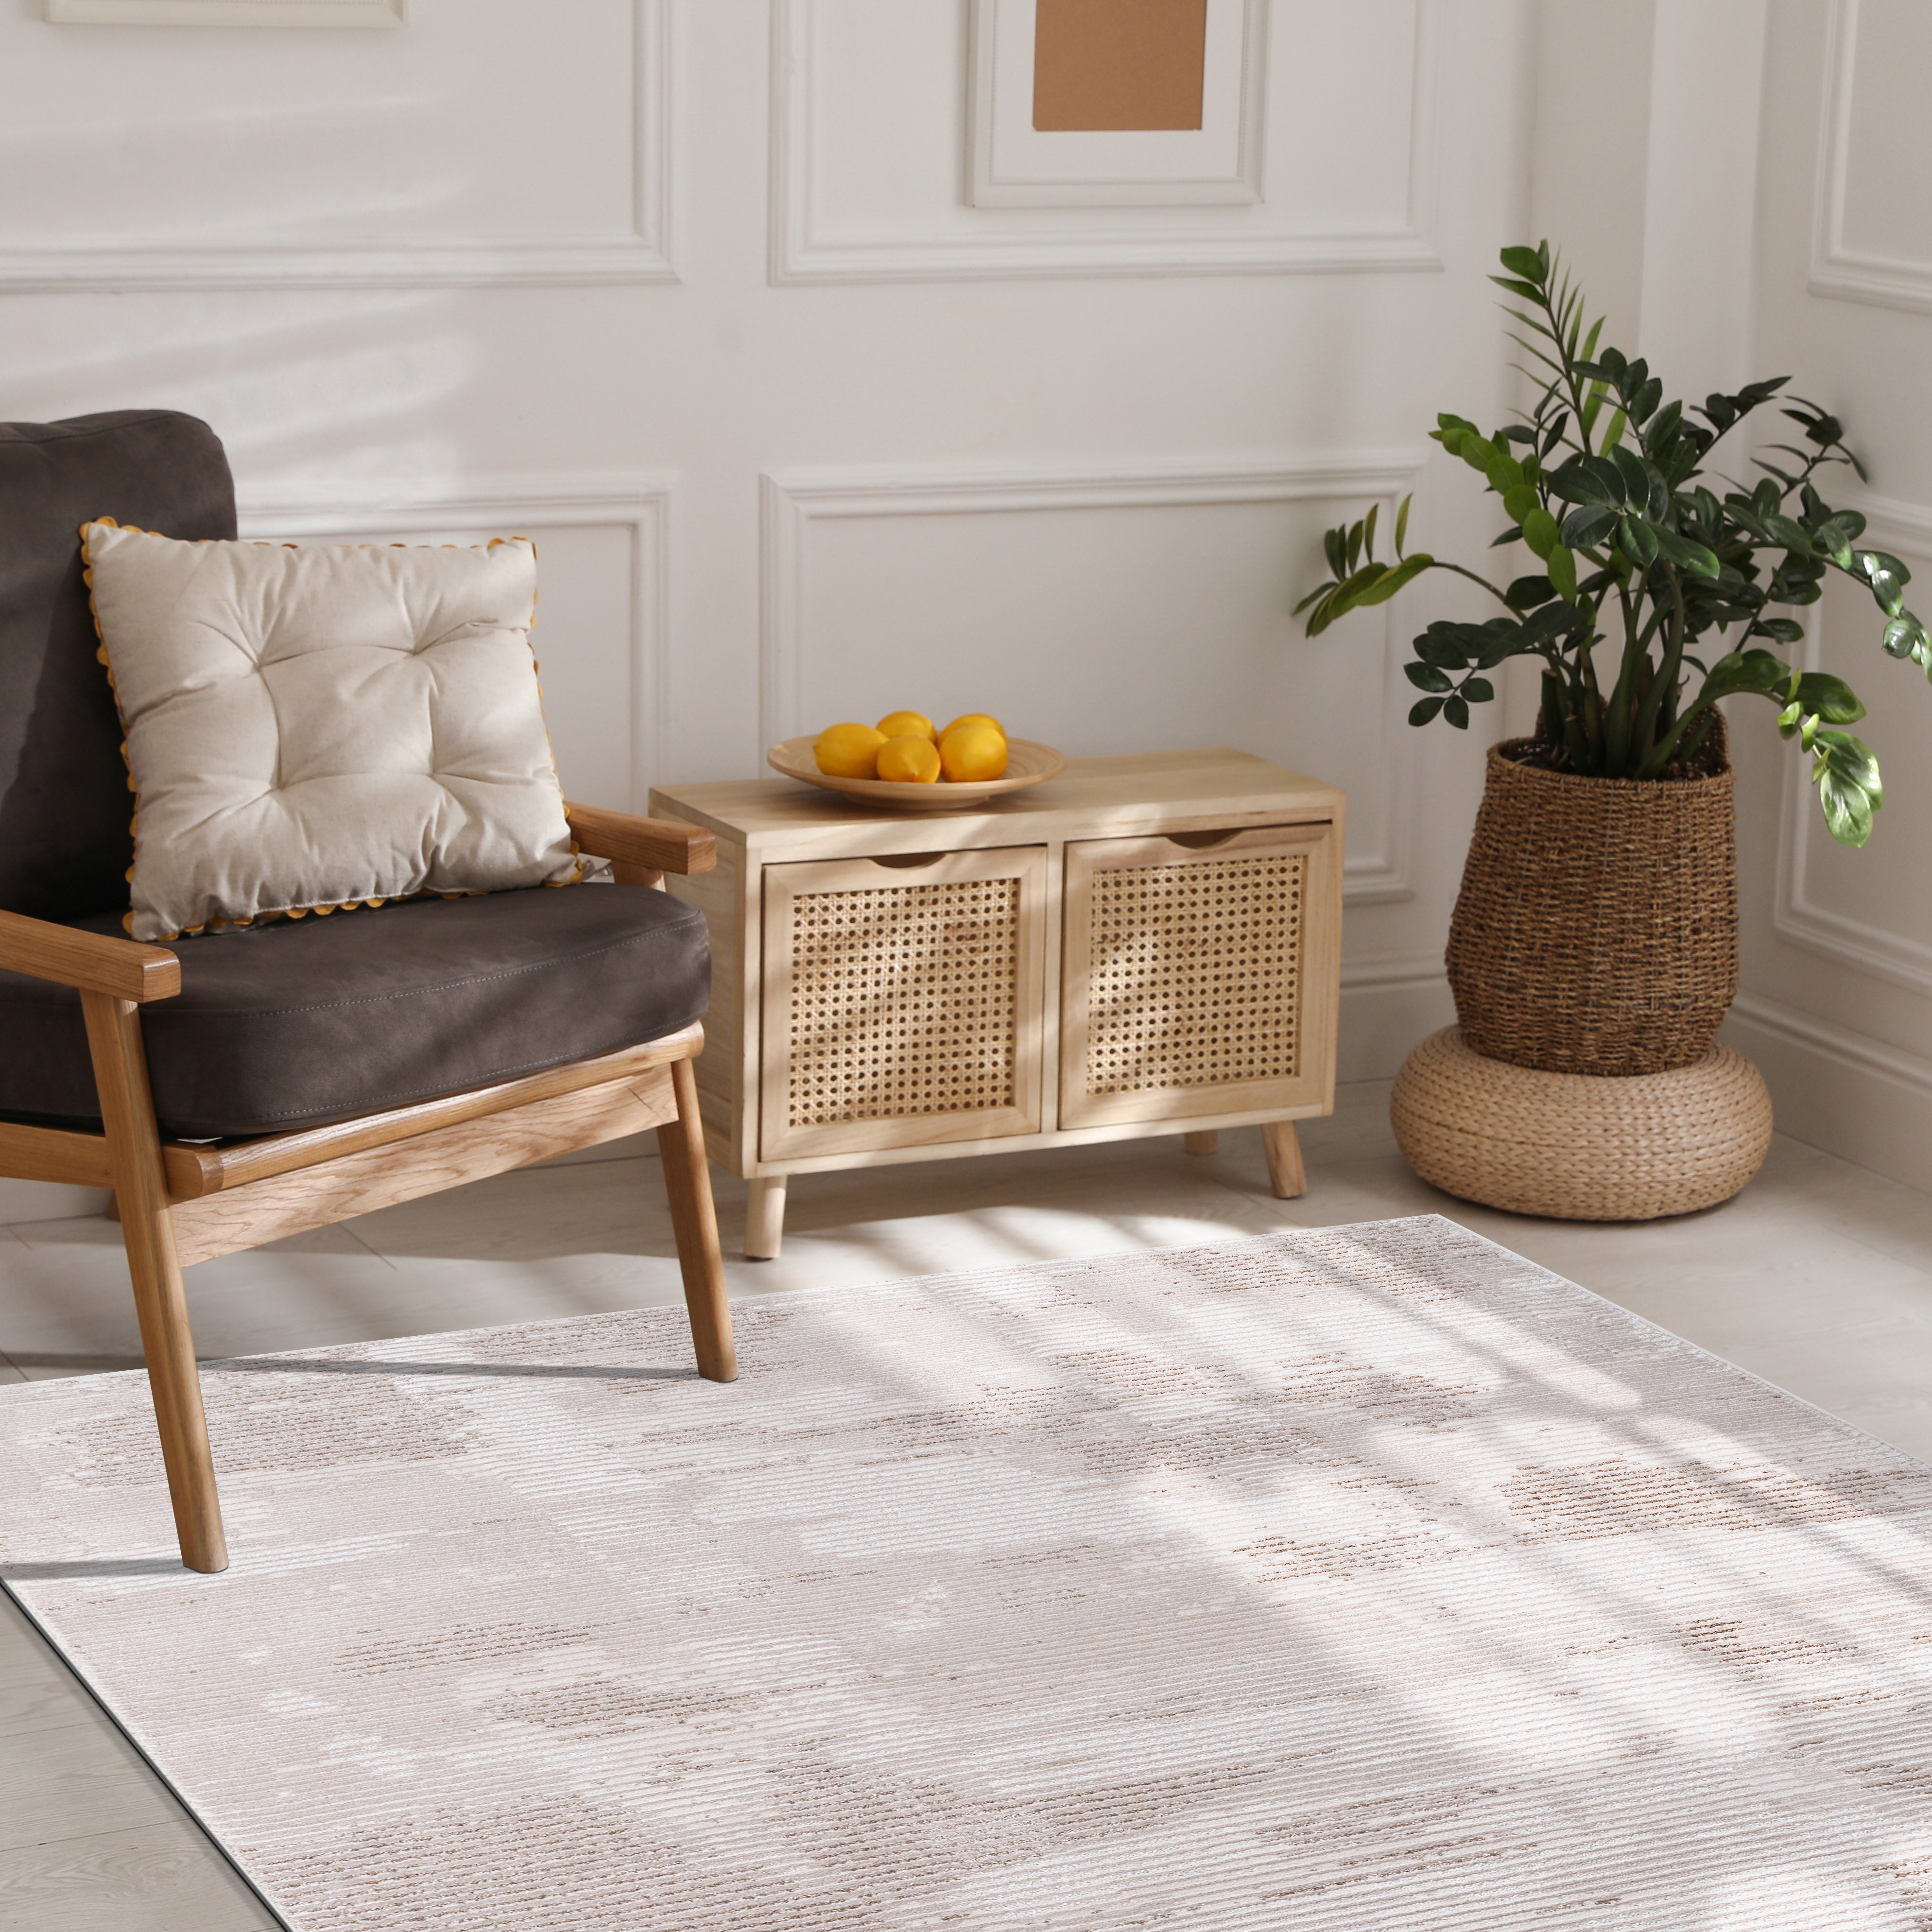 Modern Abstract Area Rug PAS4 - Beige / White